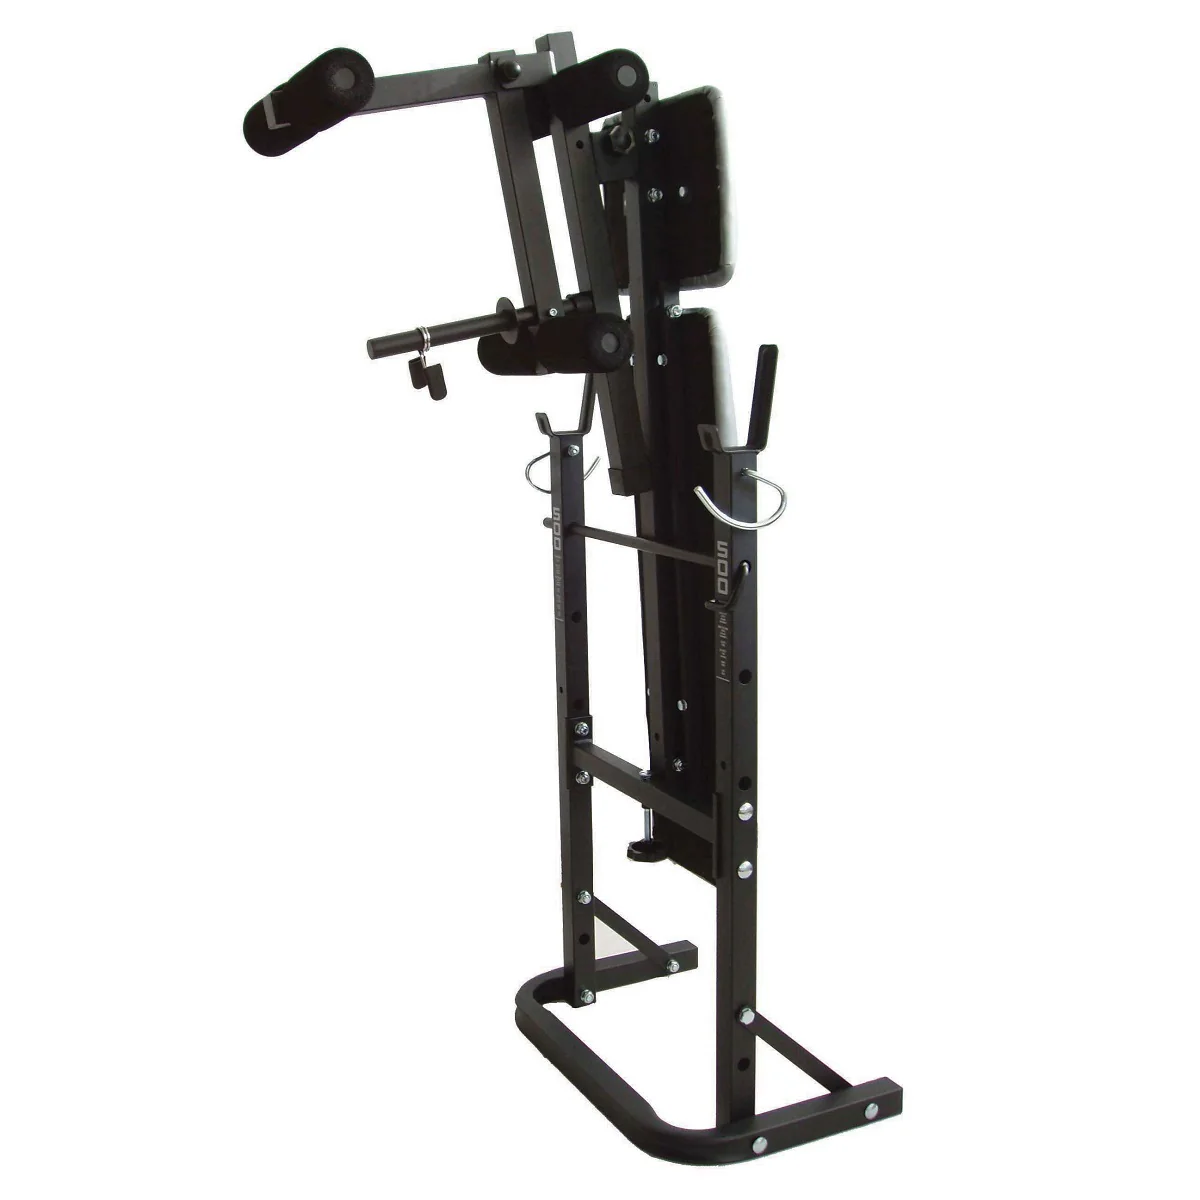 York B500 Folding Barbell Weight Bench Review